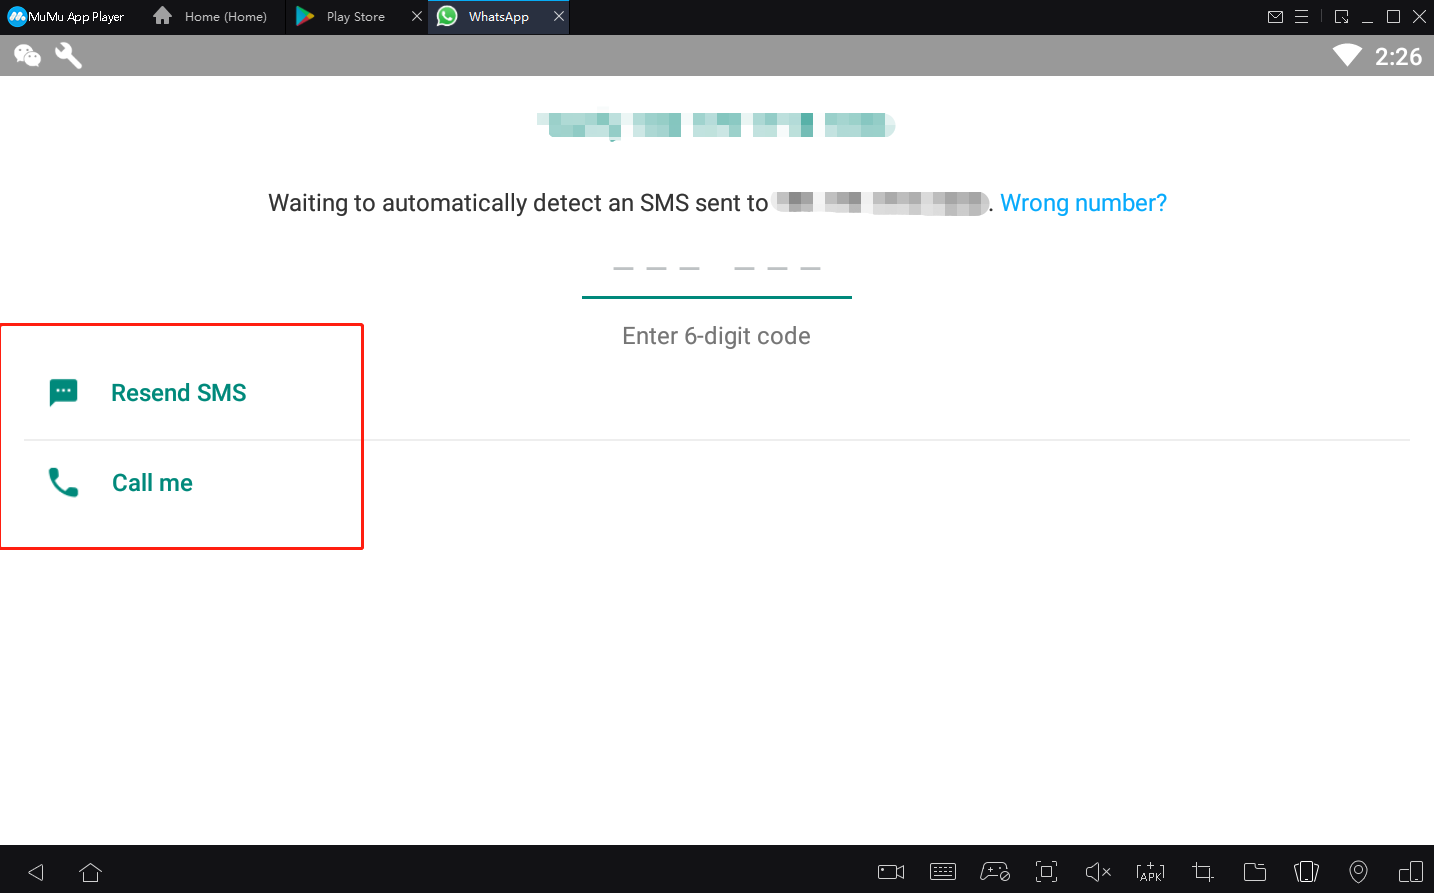 How to log in to WhatsApp with MuMu Player on PC6